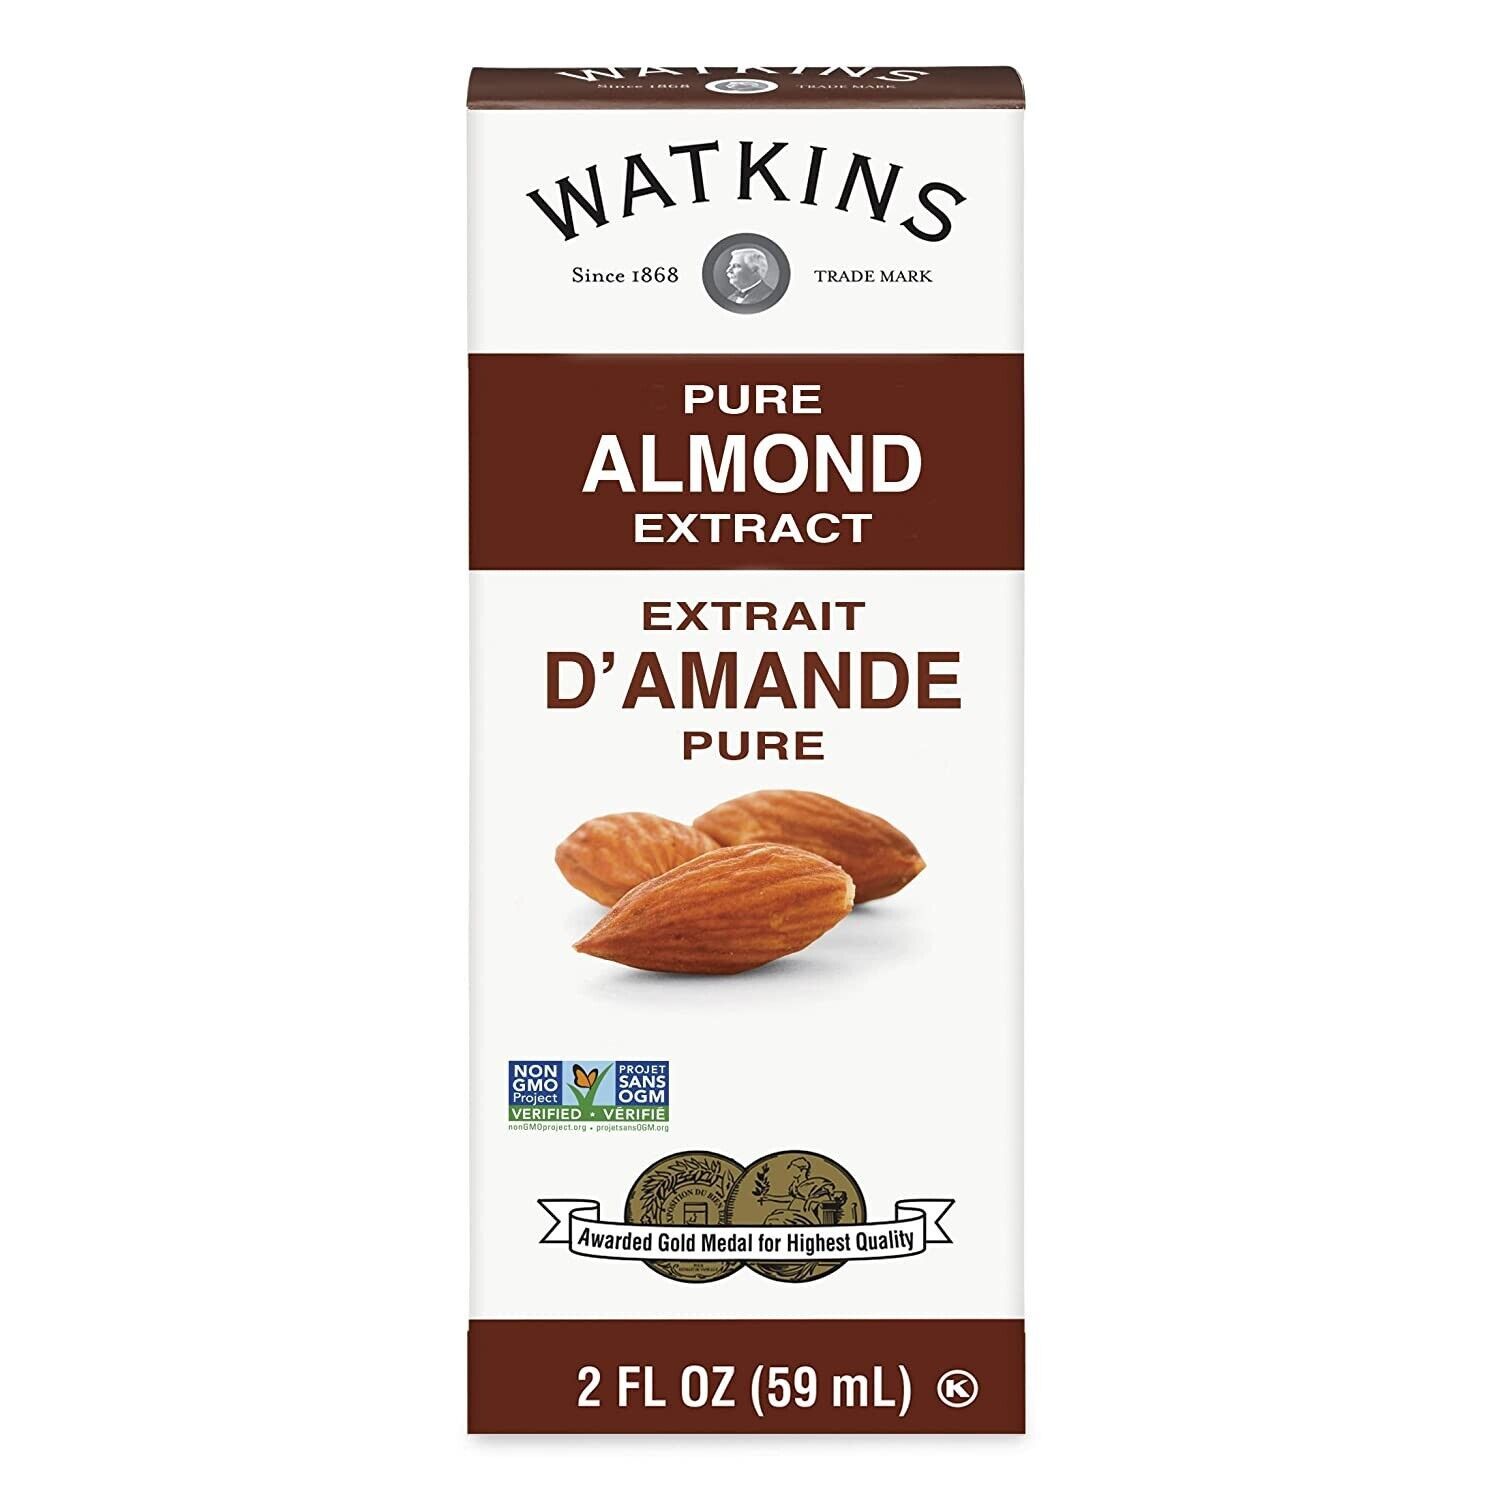 Watkins Pure Almond Extract, 2 Fl Oz, - 1 Pack EXP06/24 - $9.11